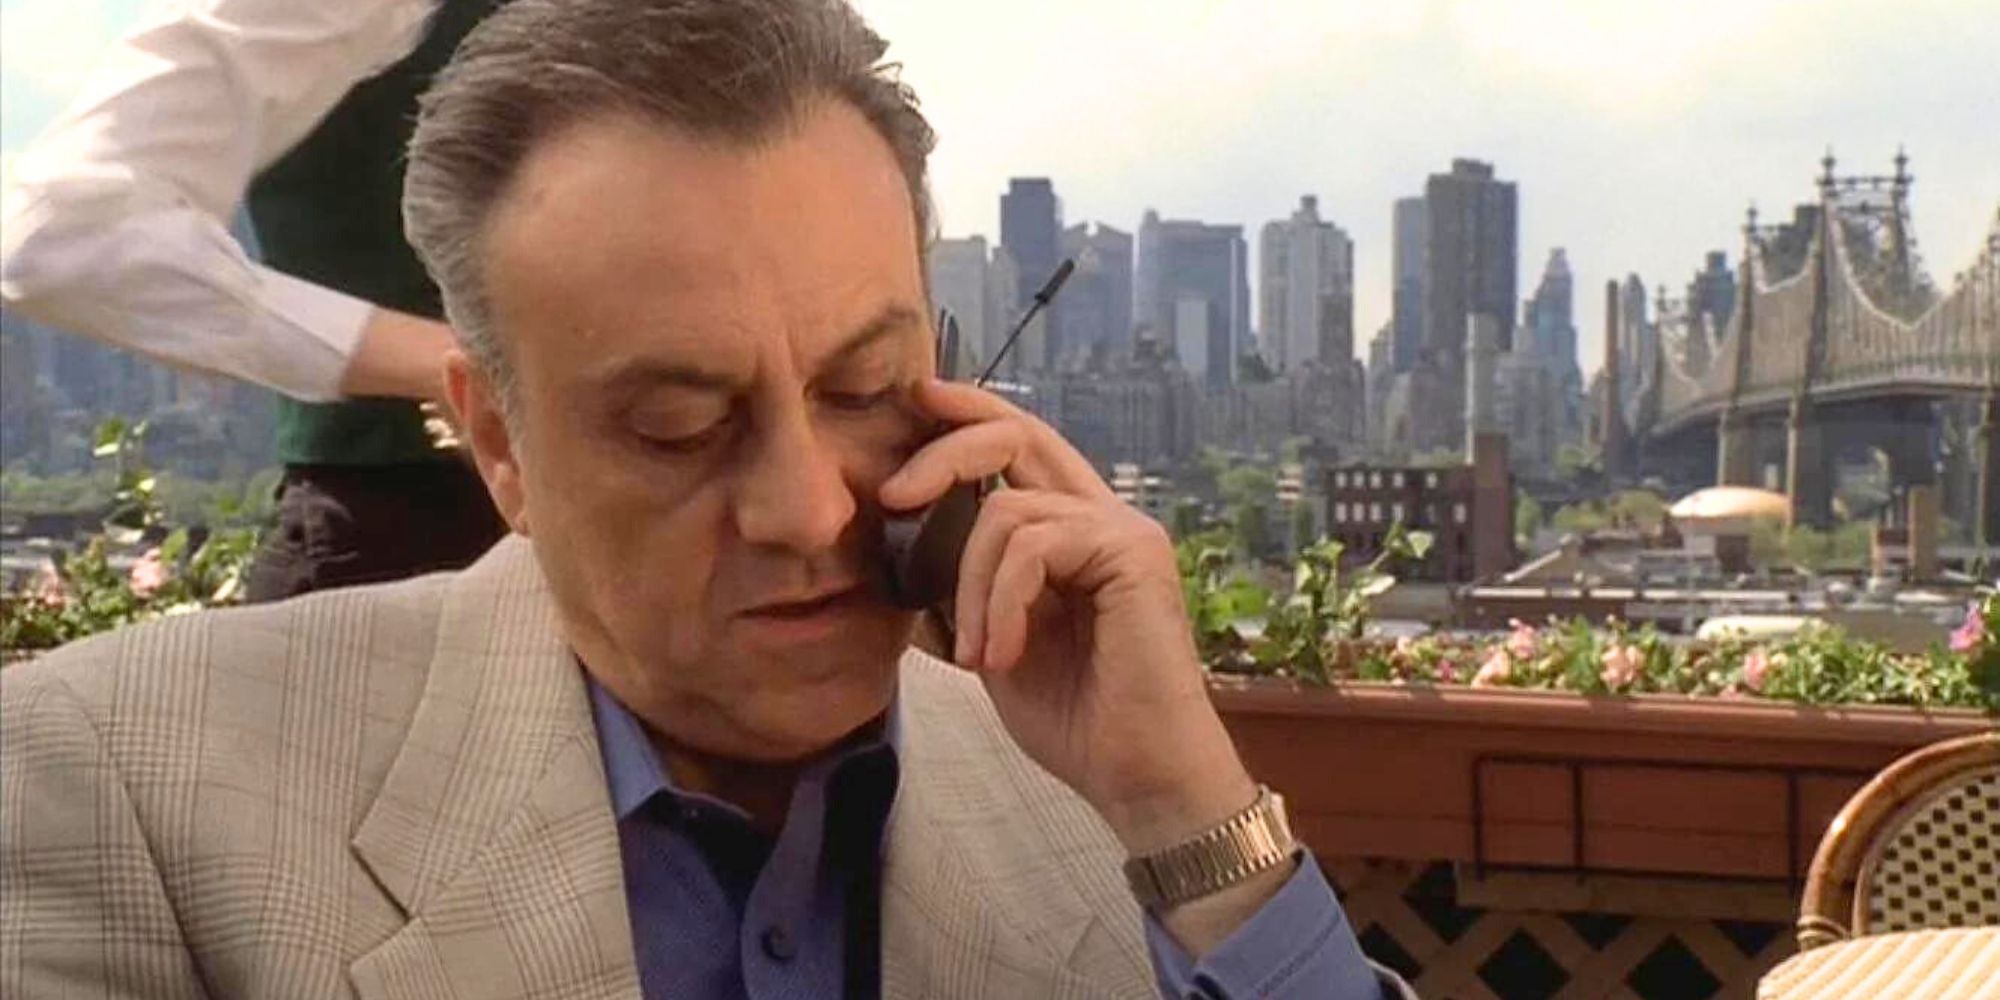 Vincent Curatola as Johnny Sack on the phone while sitting at a table in The Sopranos